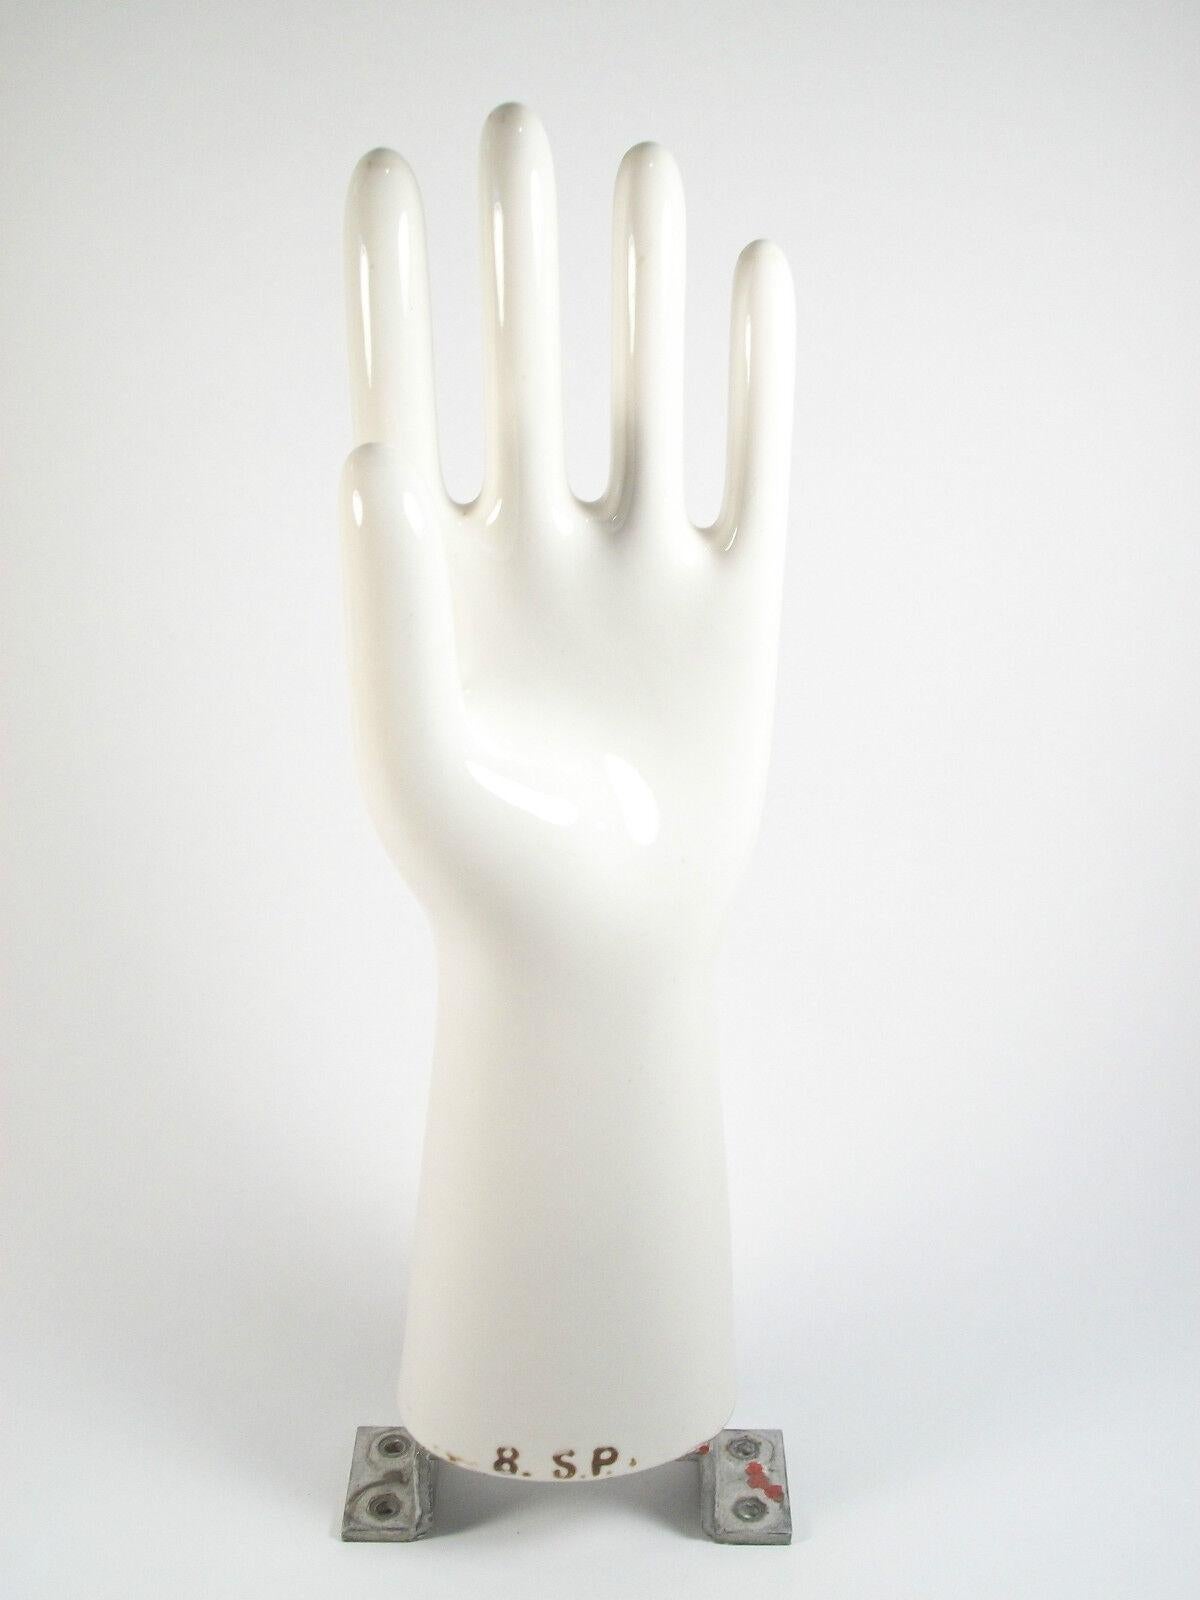 Glazed Antique Ceramic Industrial Glove Mold - U.S. - Late 19th Century For Sale